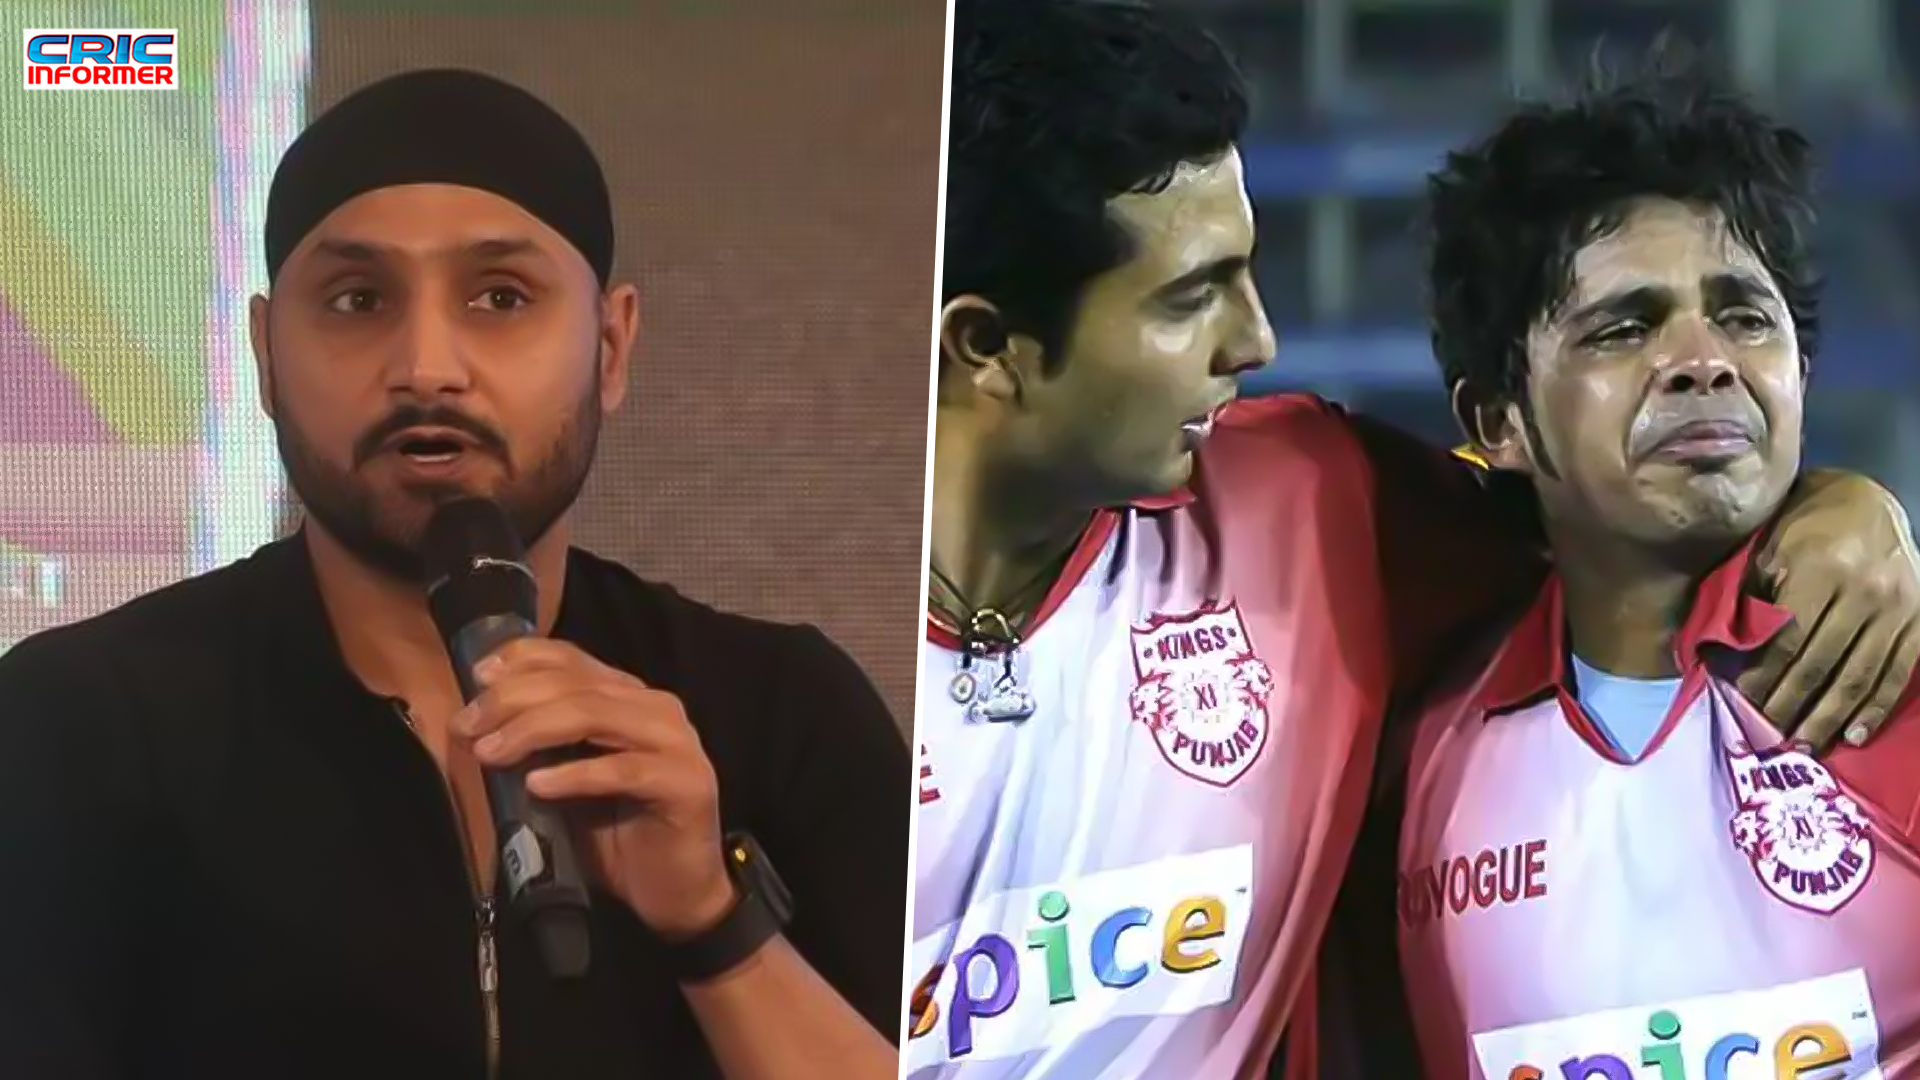 Video- Harbhajan Singh opens up about slap incident in IPL 2008 with Sreesanth, says 'It should not have happened'